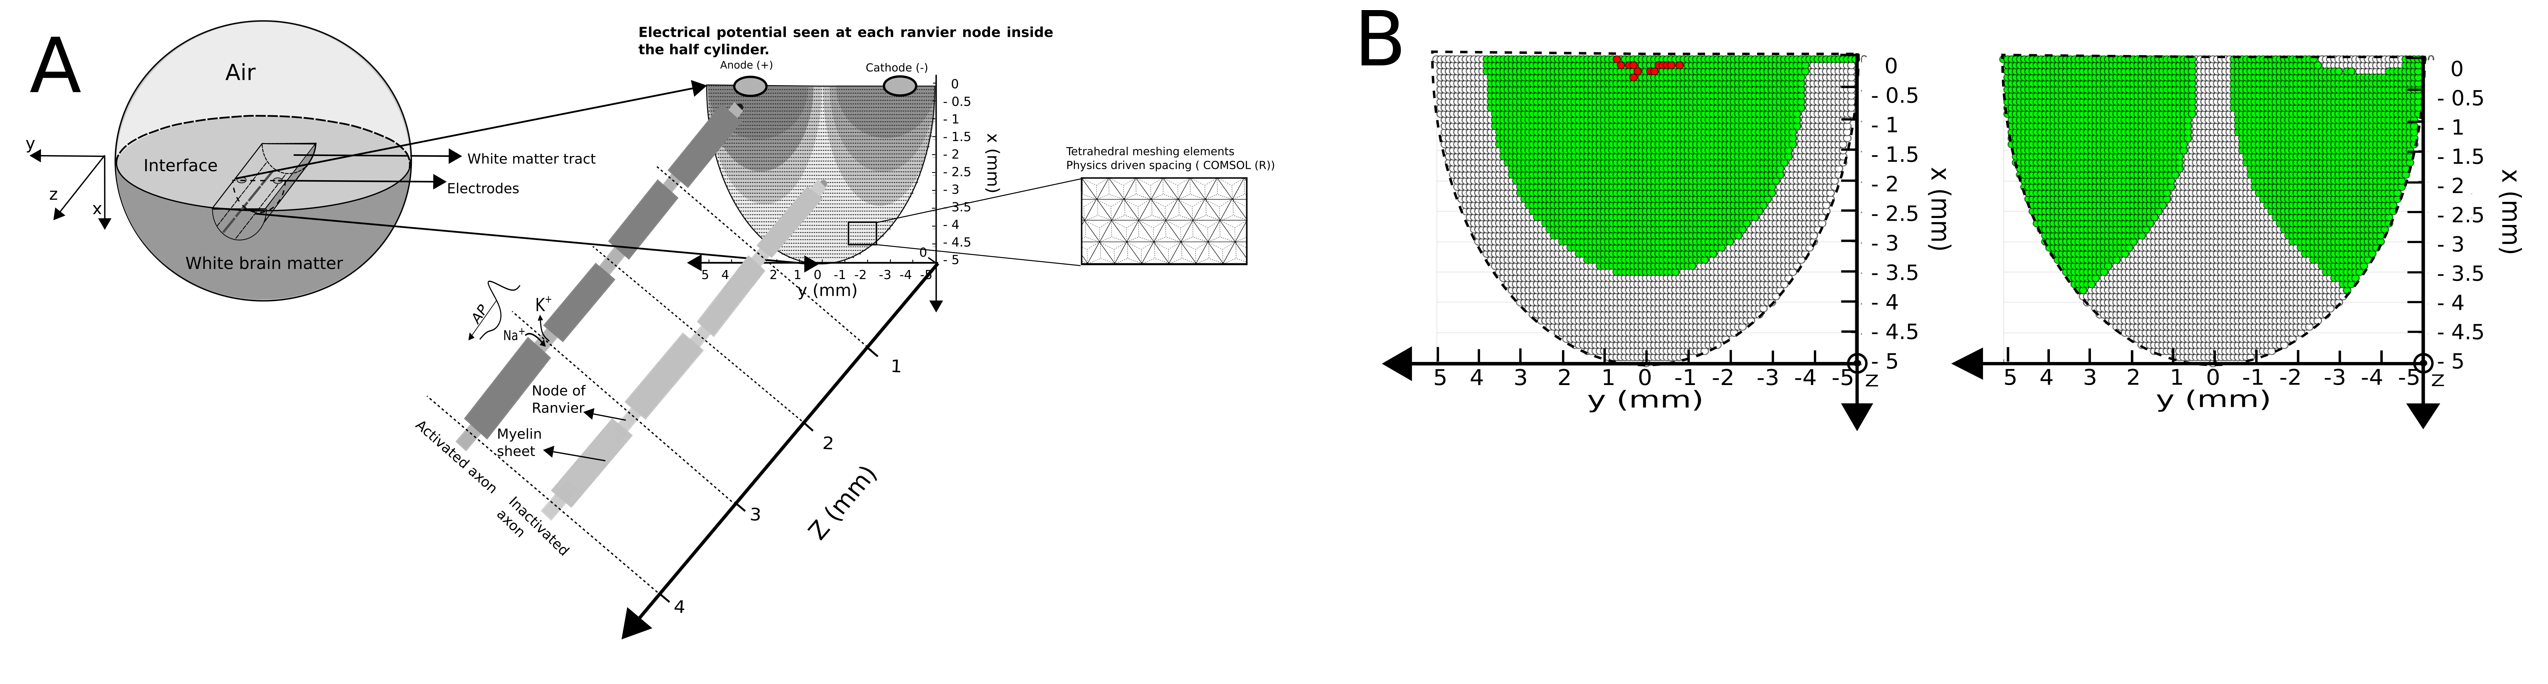 A) represents the built geometry in COMSOL multiphysics (left) and the axon location for the CRRSS model computation (center). Each axon has a computed potential at each of its own Ranvier node according to a pre-determined meshing in COMSOL matching with the in vivo axons sizes. B): activation maps for a 2.5mA bipolar (probe orientation beeing either orthogonal or parallel to the tract), 500 µs phase width balanced square biphasic stimulation of a white matter pathways. Green dots show axons propagating in both direction along the axons (+z -z). Left and right plots, represent parallel and orthogonal stimulation respectively.